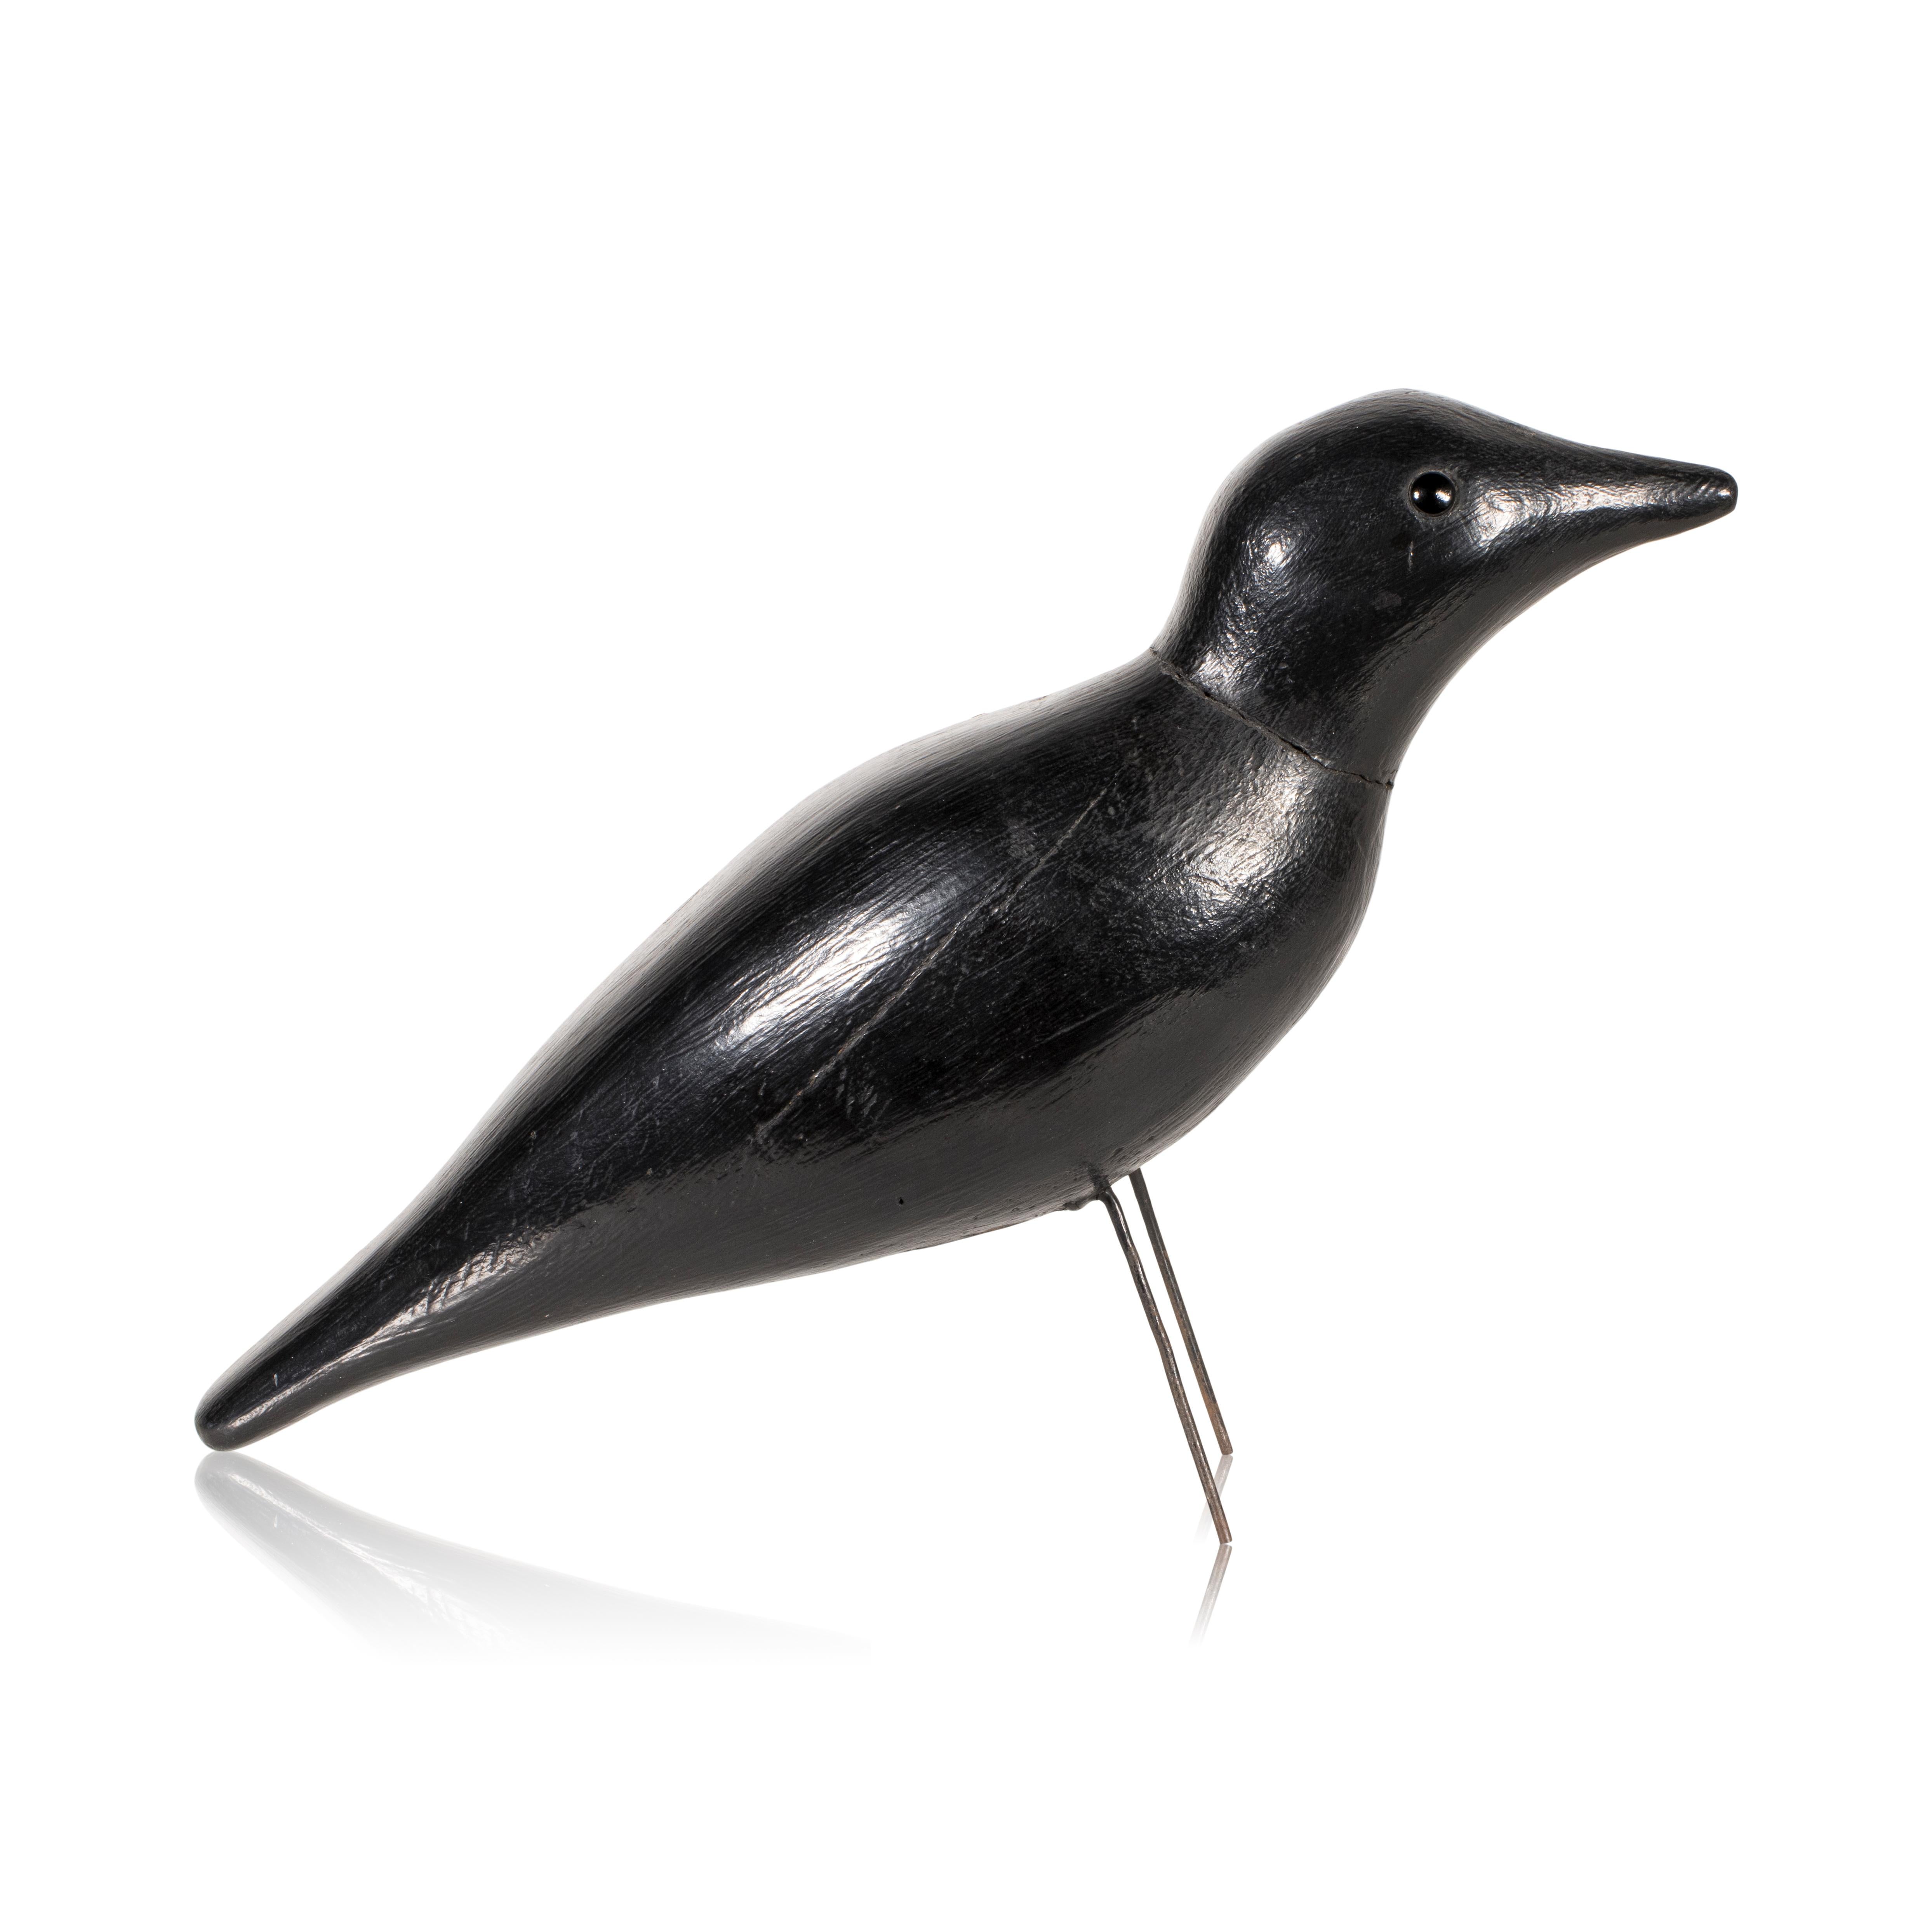 Early 20th Century carved and painted crow decoy with glass eyes and wire legs.

Period: Early 20th century
Origin: United States
Size: 10